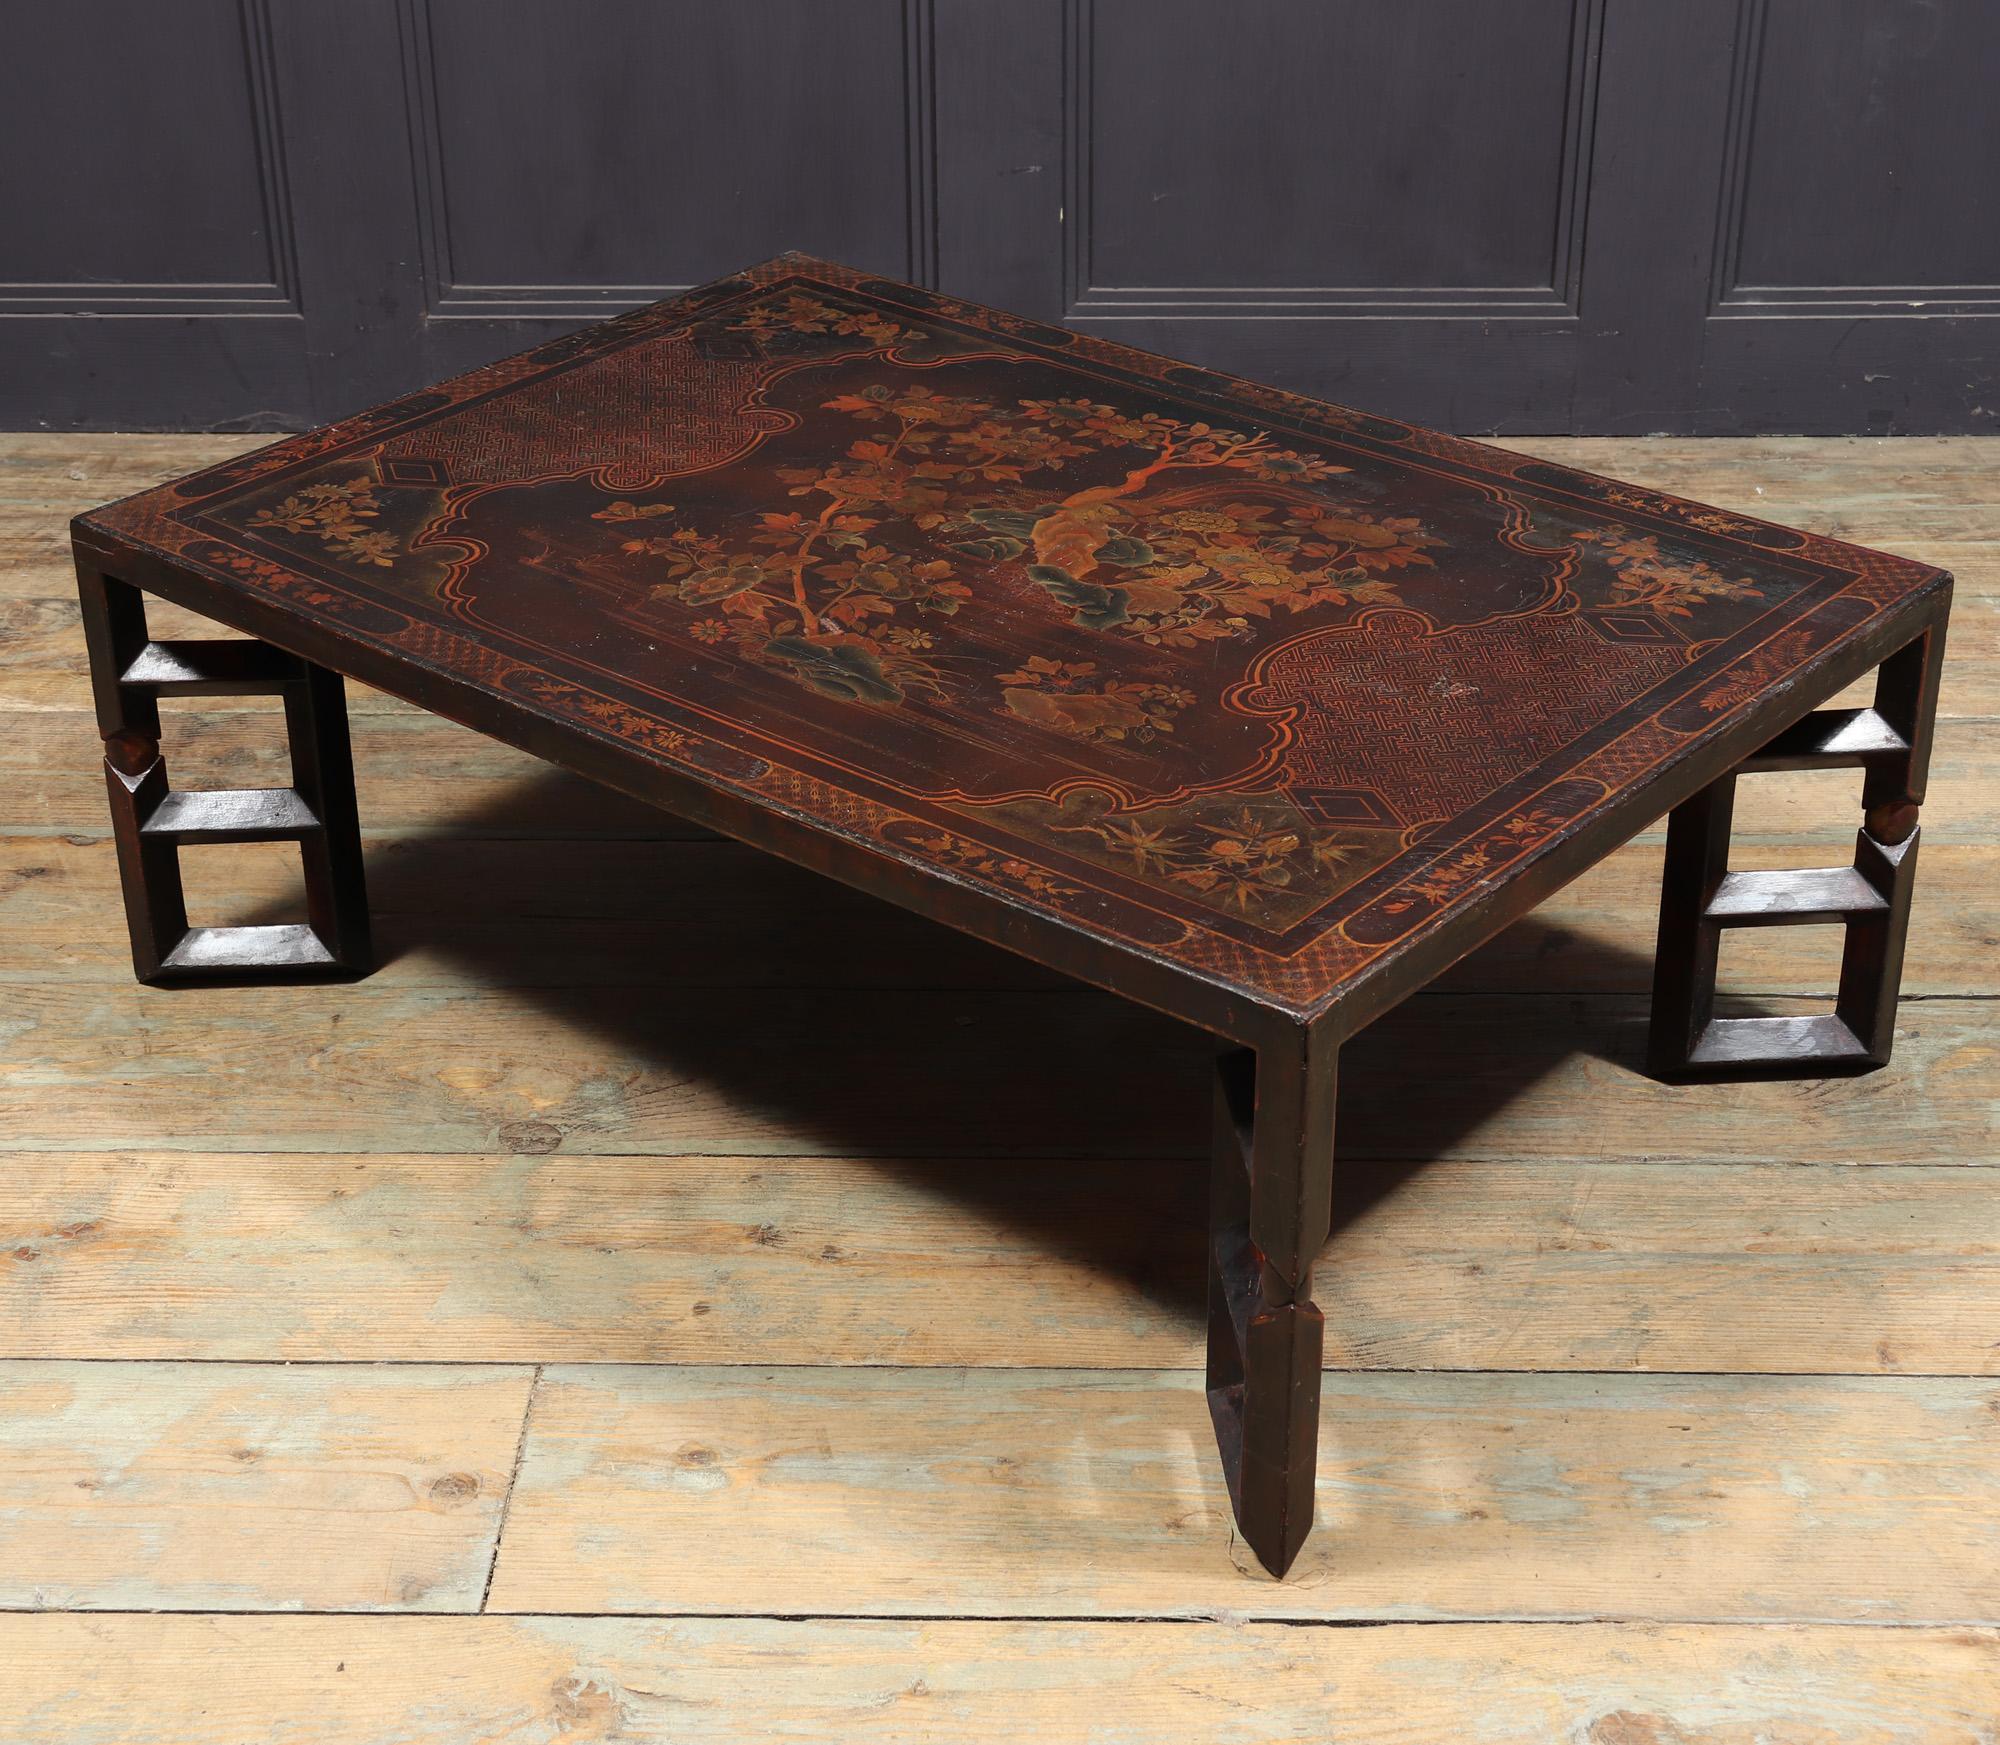 ANTIQUE CHINOISERIE TABLE 
A great example of a chinoiserie table dating back to the early 1900s, adorned with exquisite floral motifs featuring birds and butterflies, all beautifully complemented by intricate geometric patterns. This remarkable